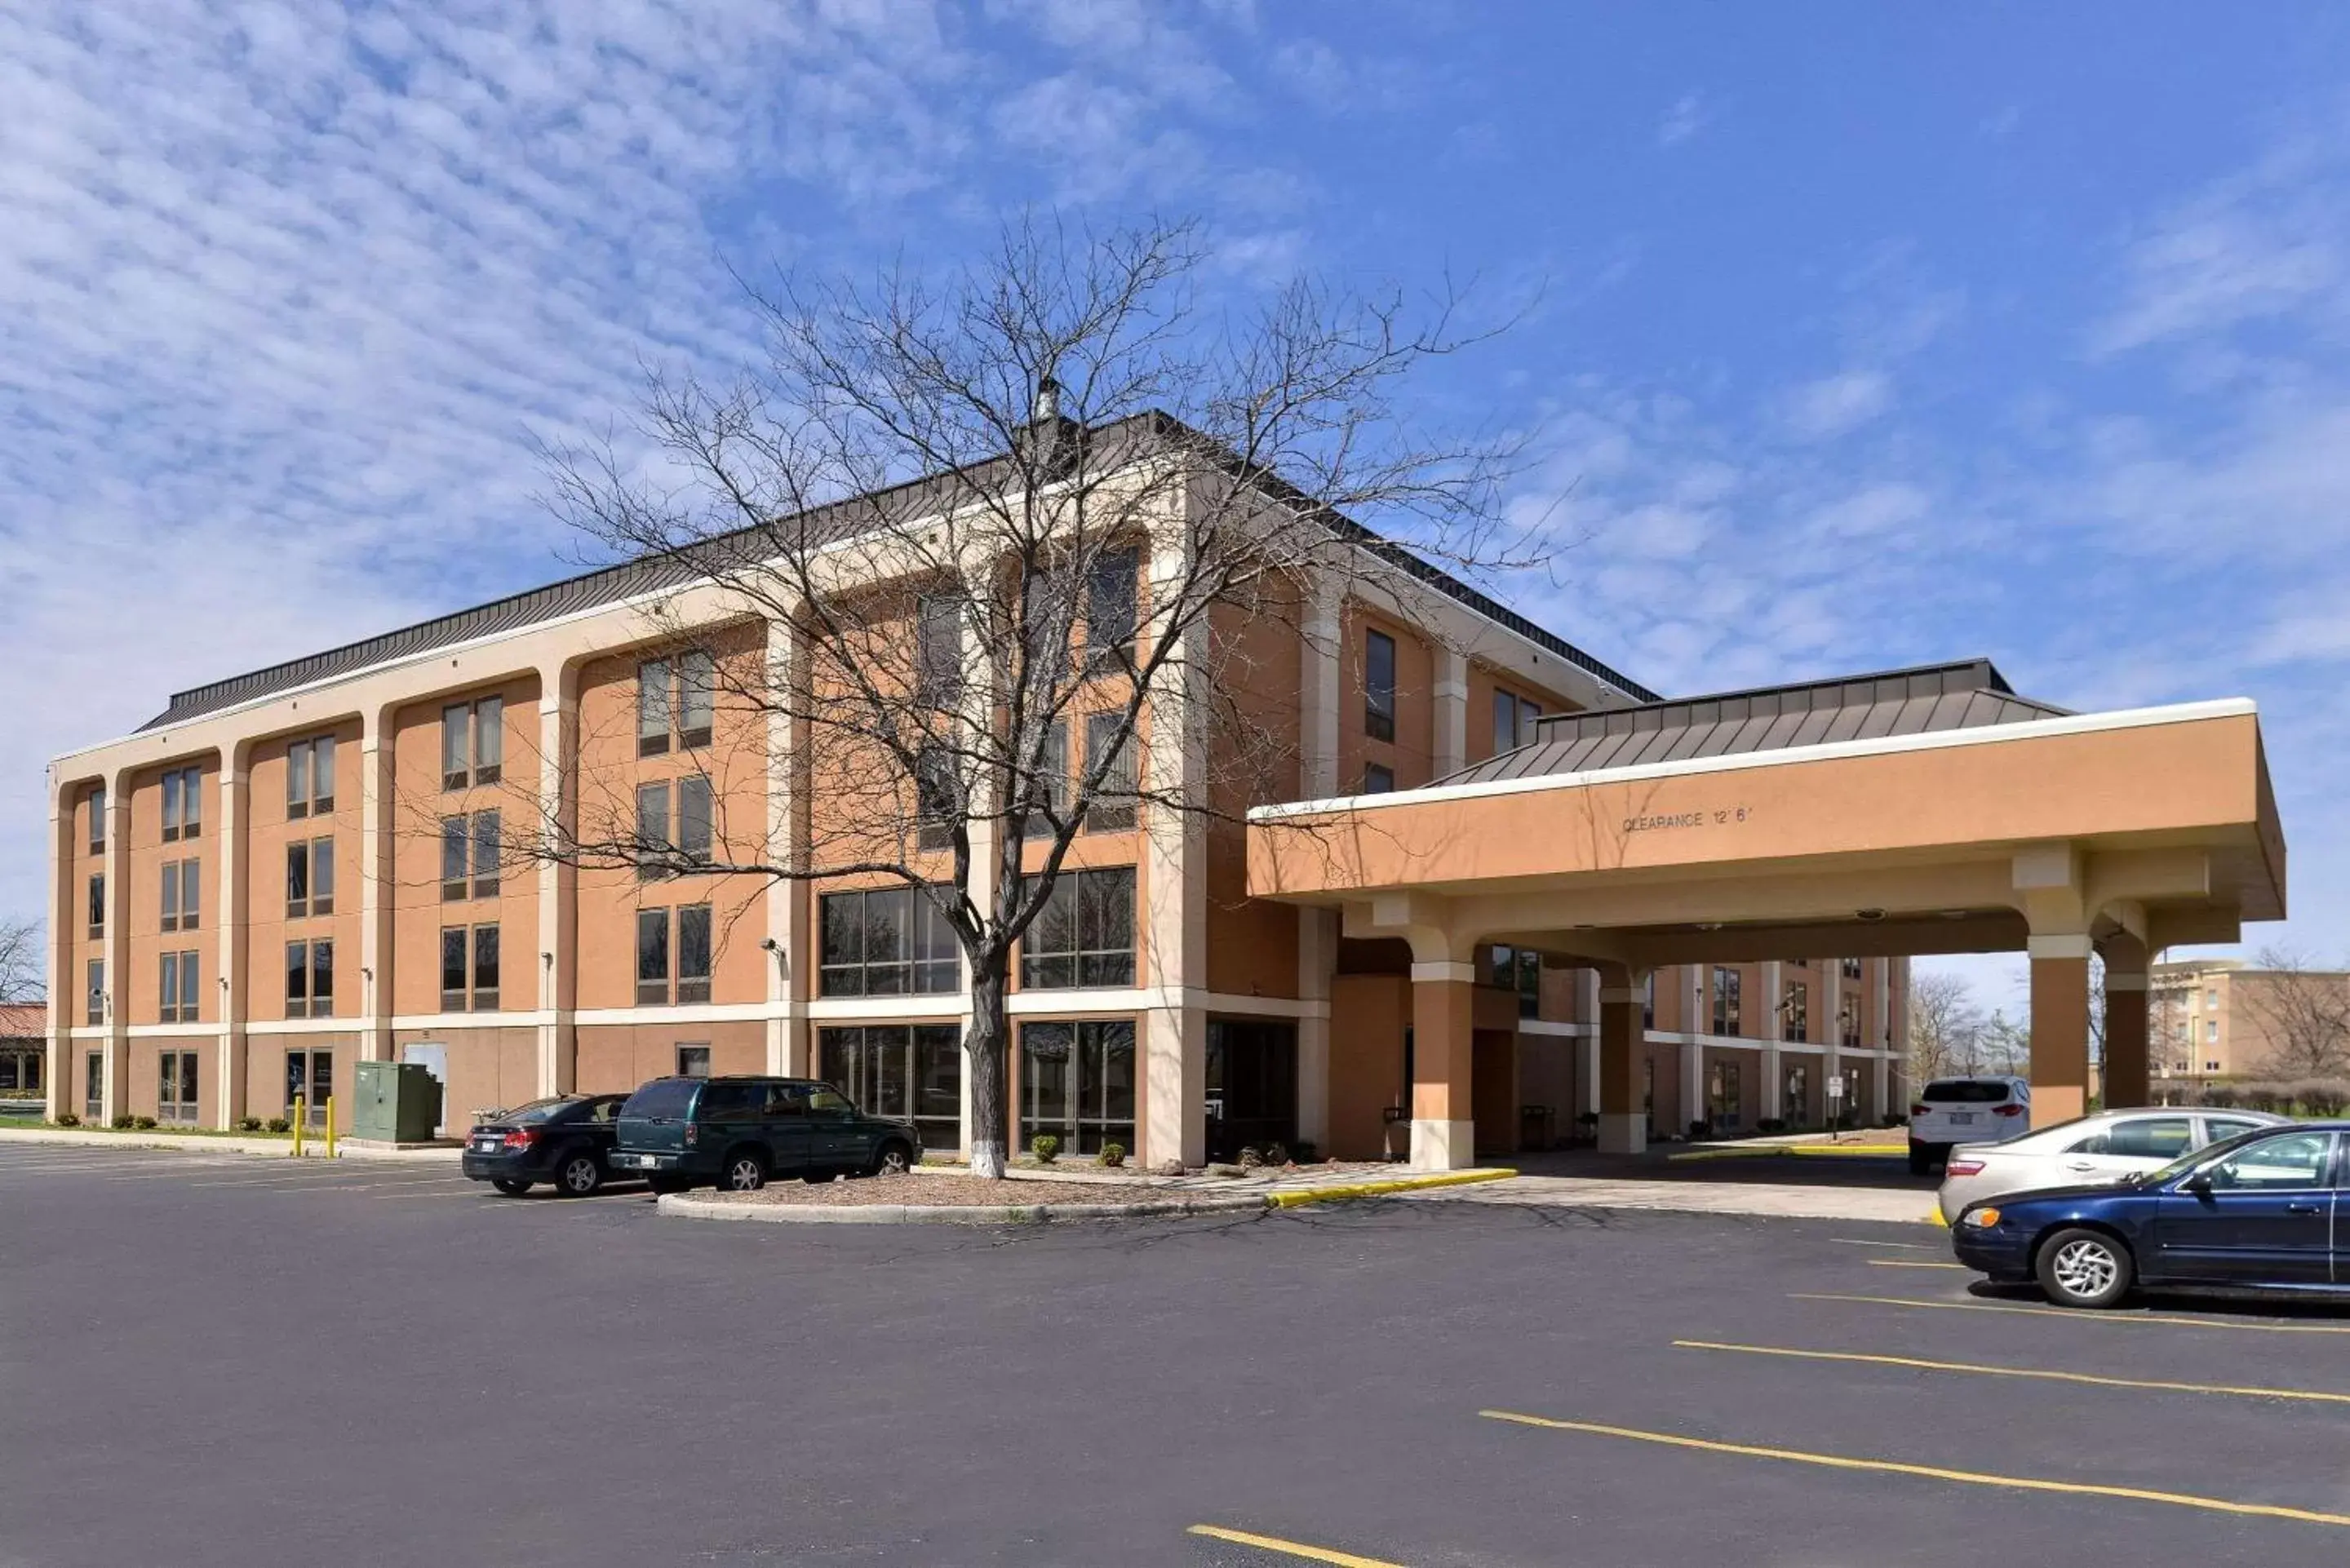 Property Building in Quality Inn & Suites Matteson near I-57